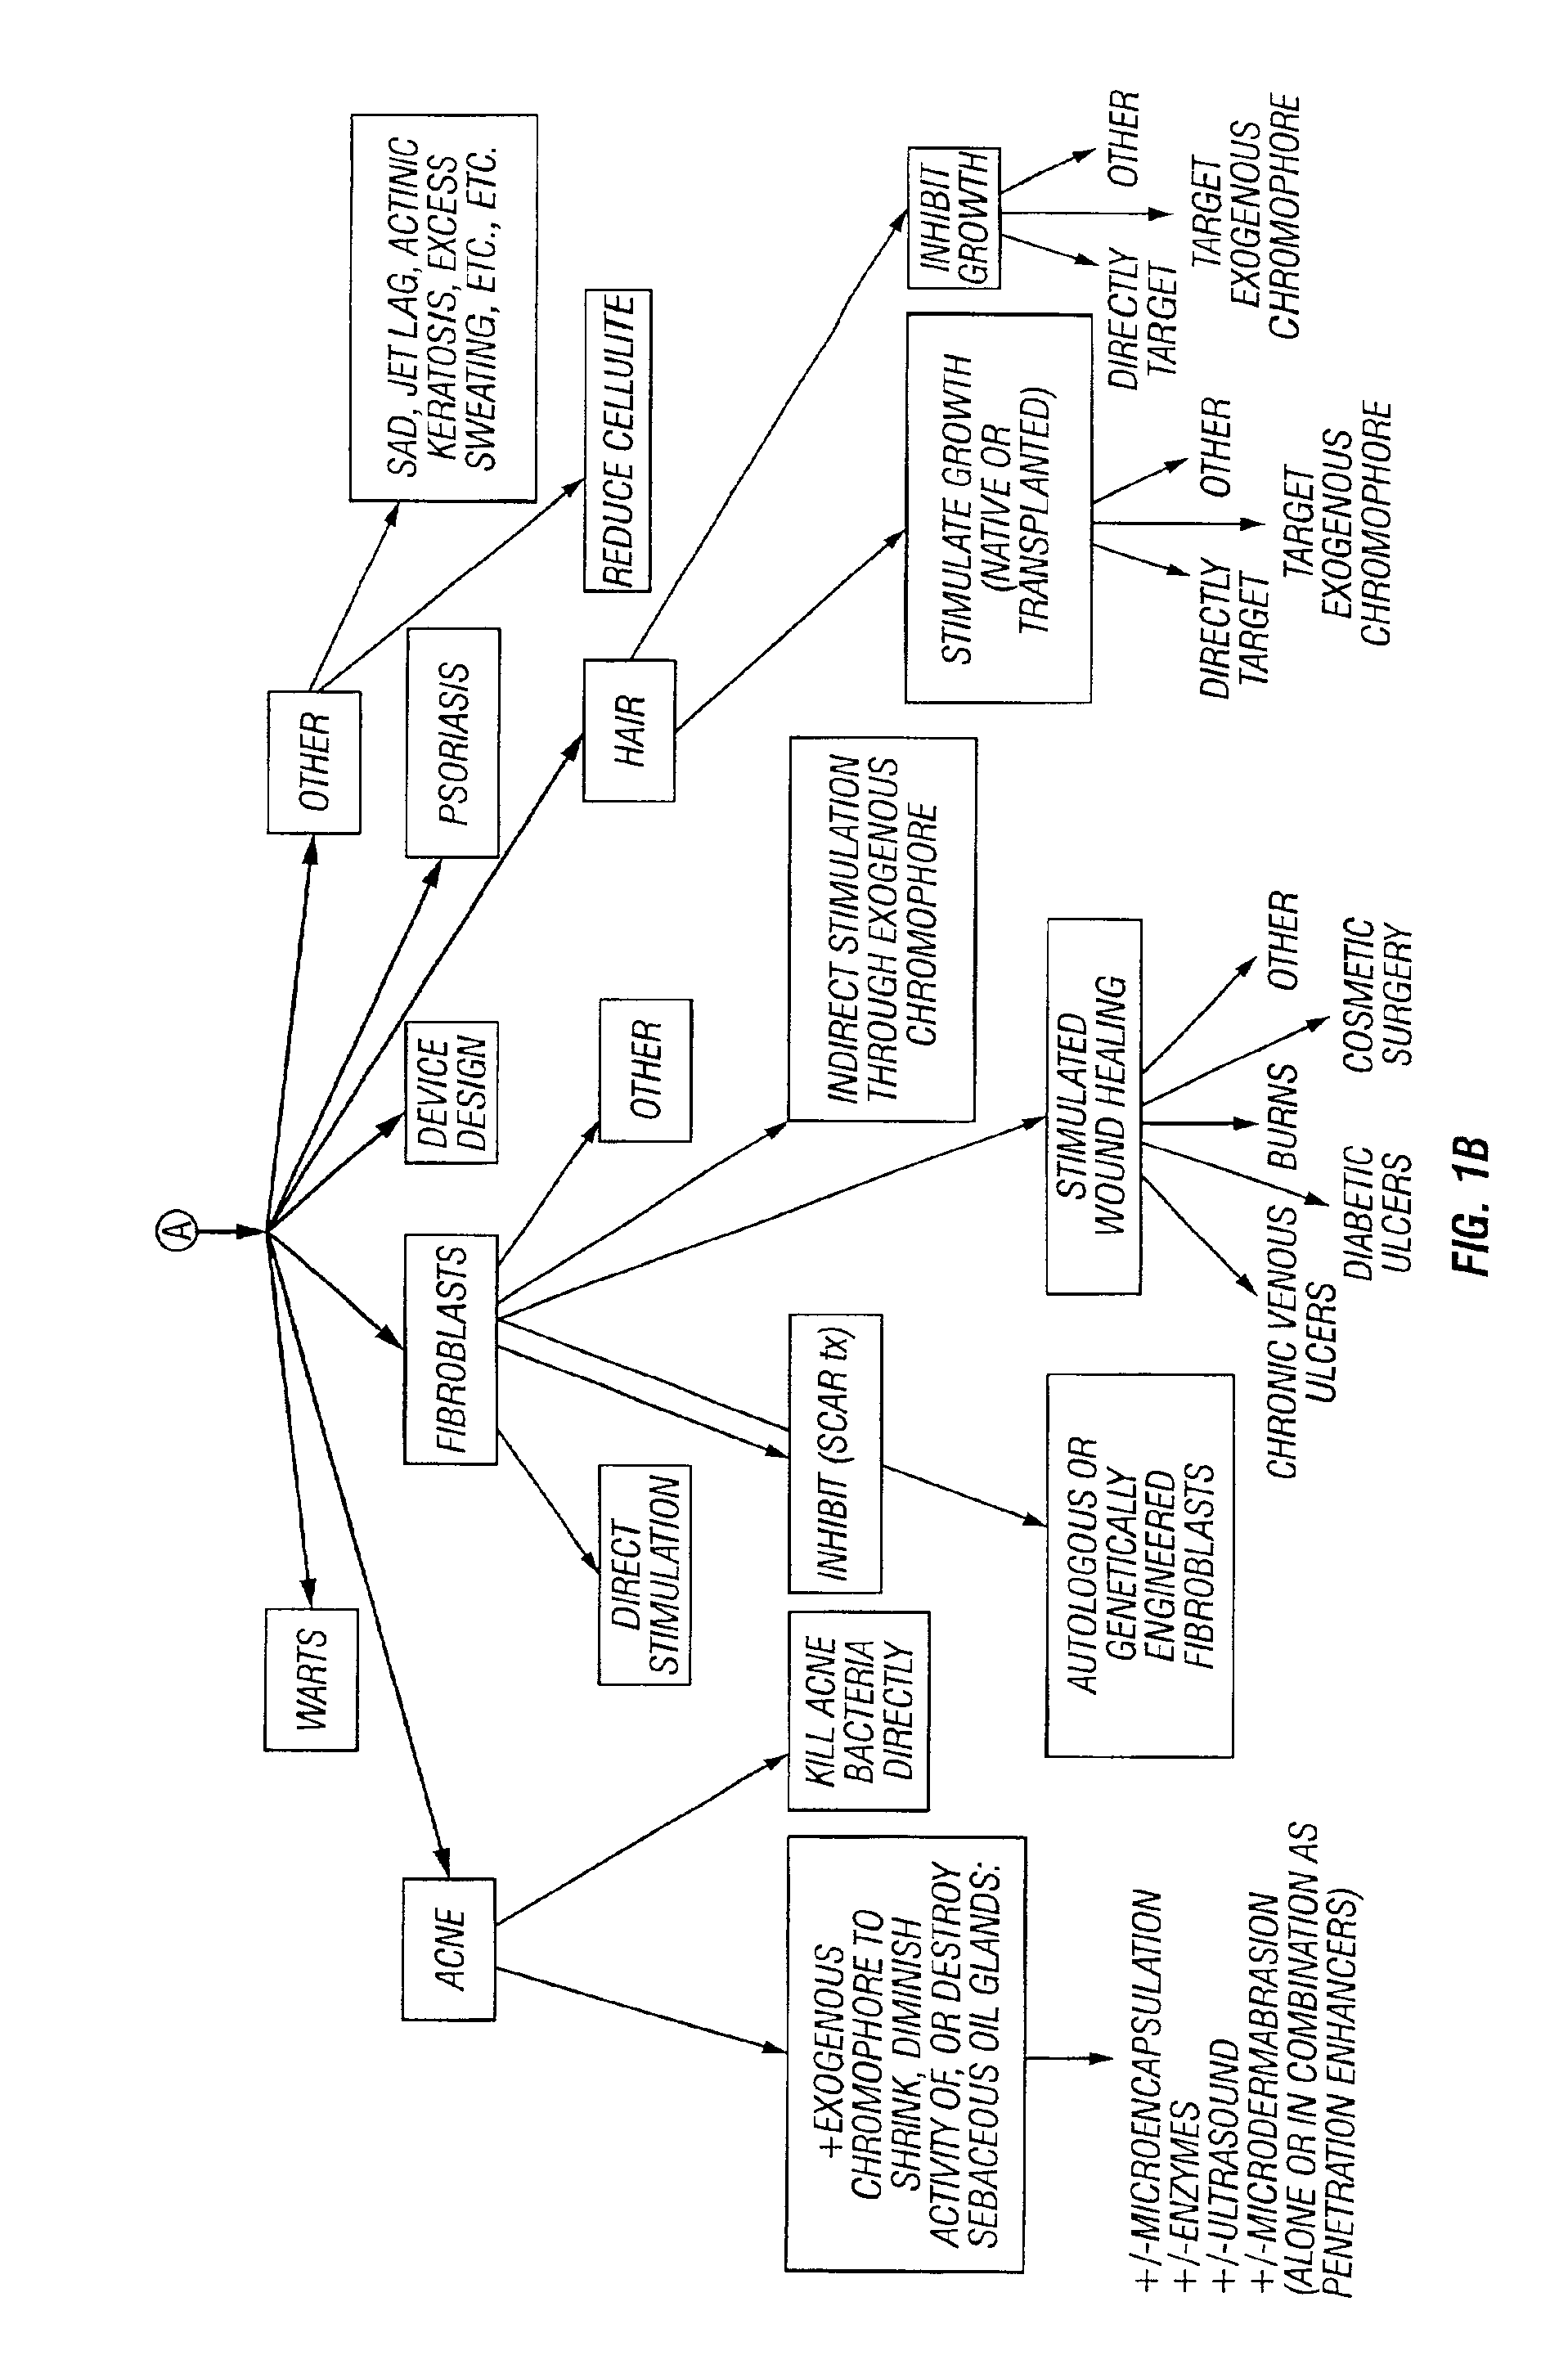 Method and apparatus for the stimulation of hair growth